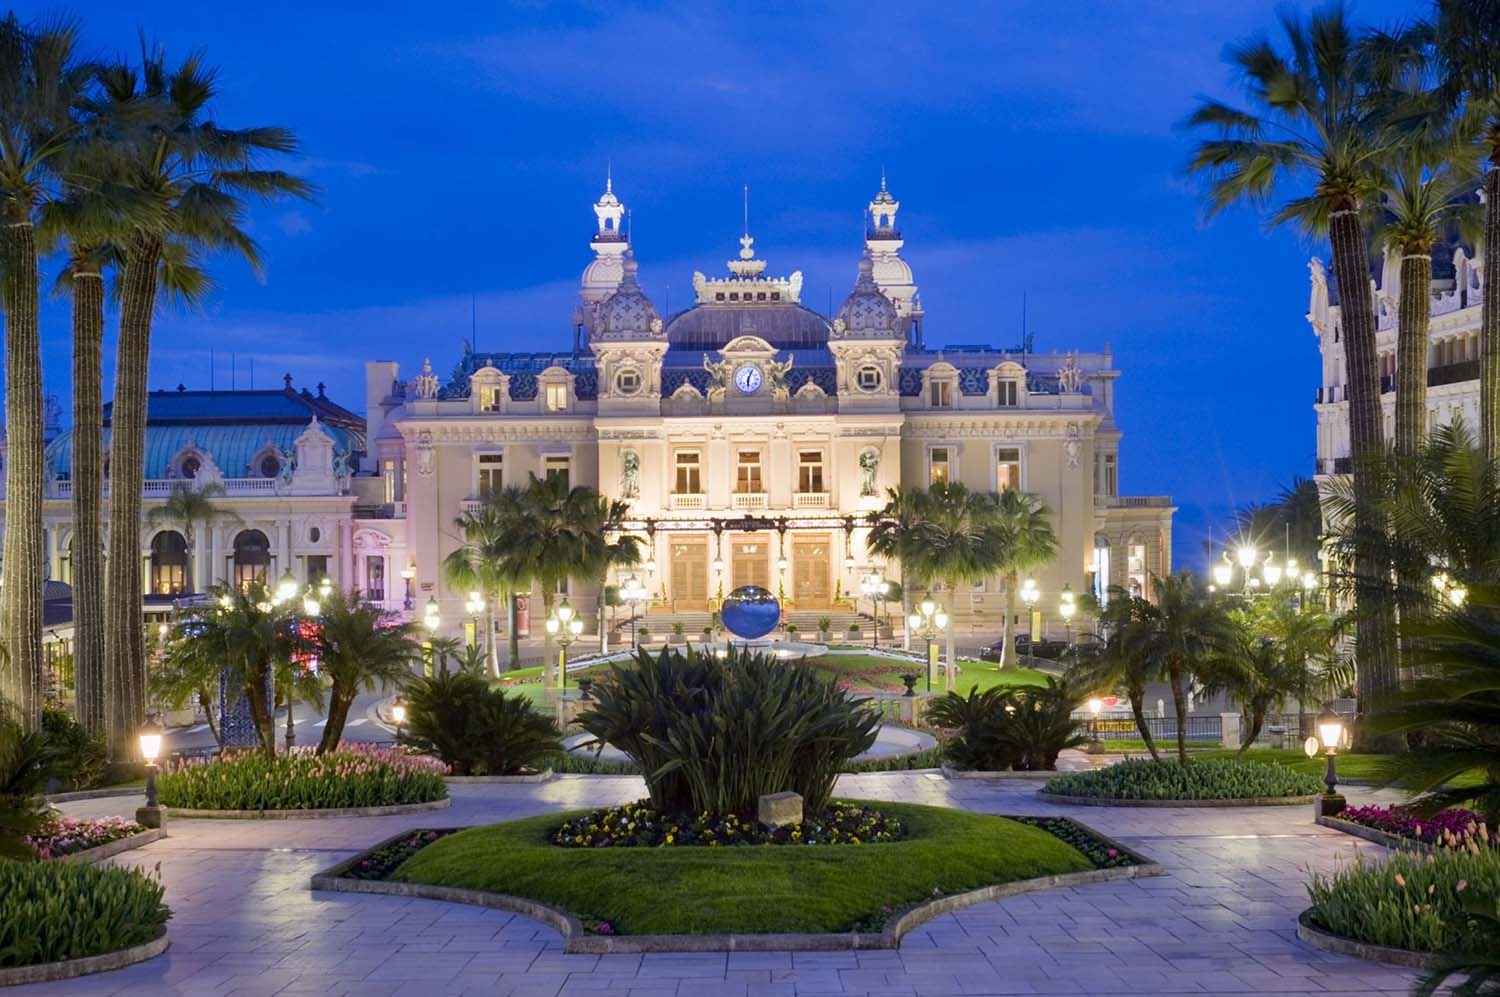 From Nice: What to See in the Vicinity of Nice